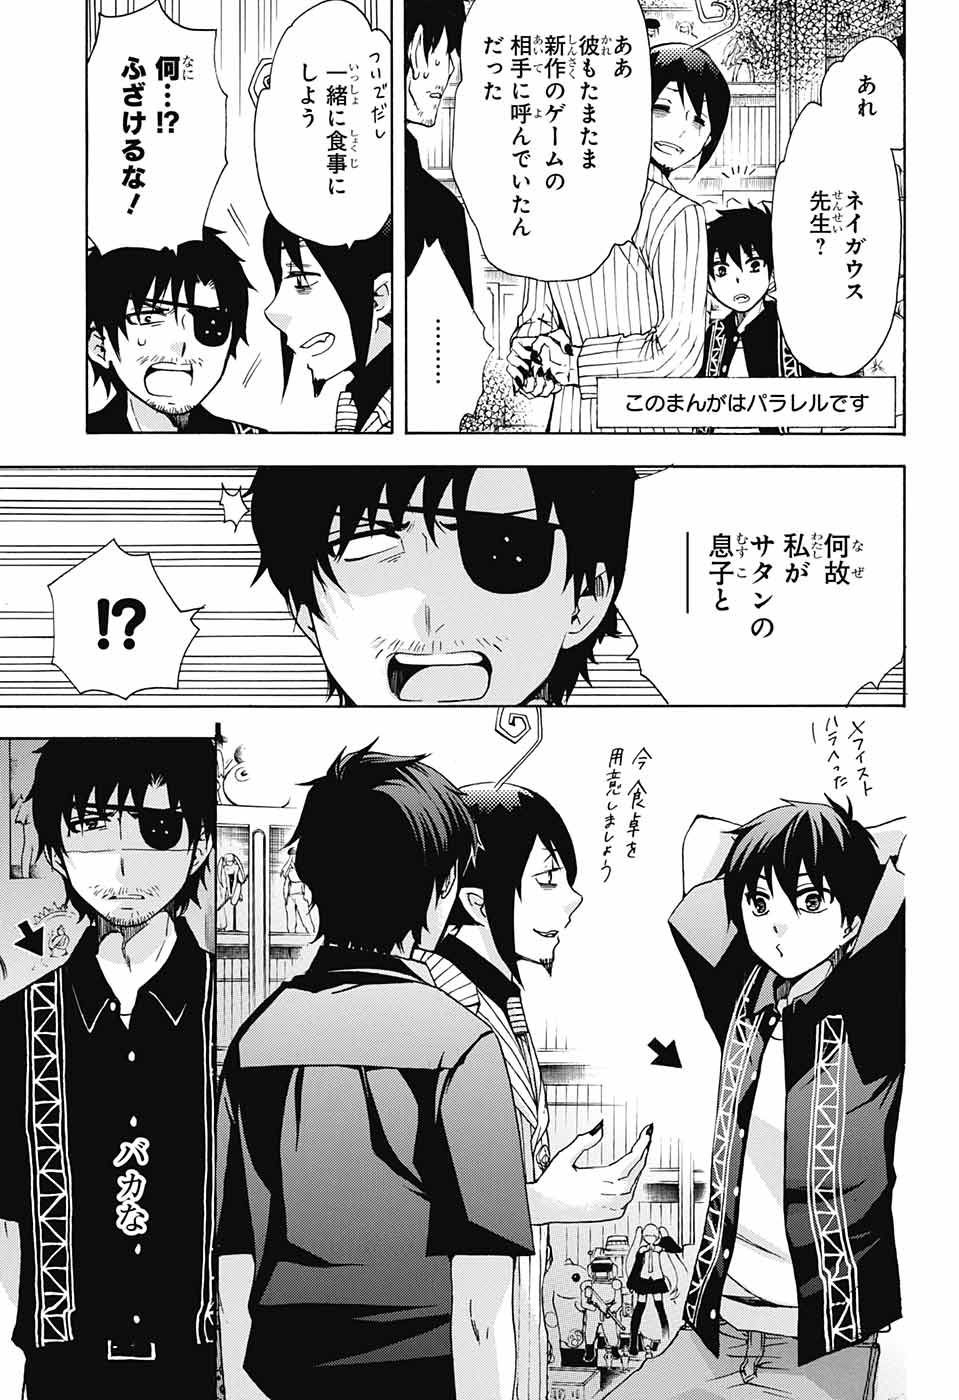 Ao no Exorcist - Chapter 102 - Page 37